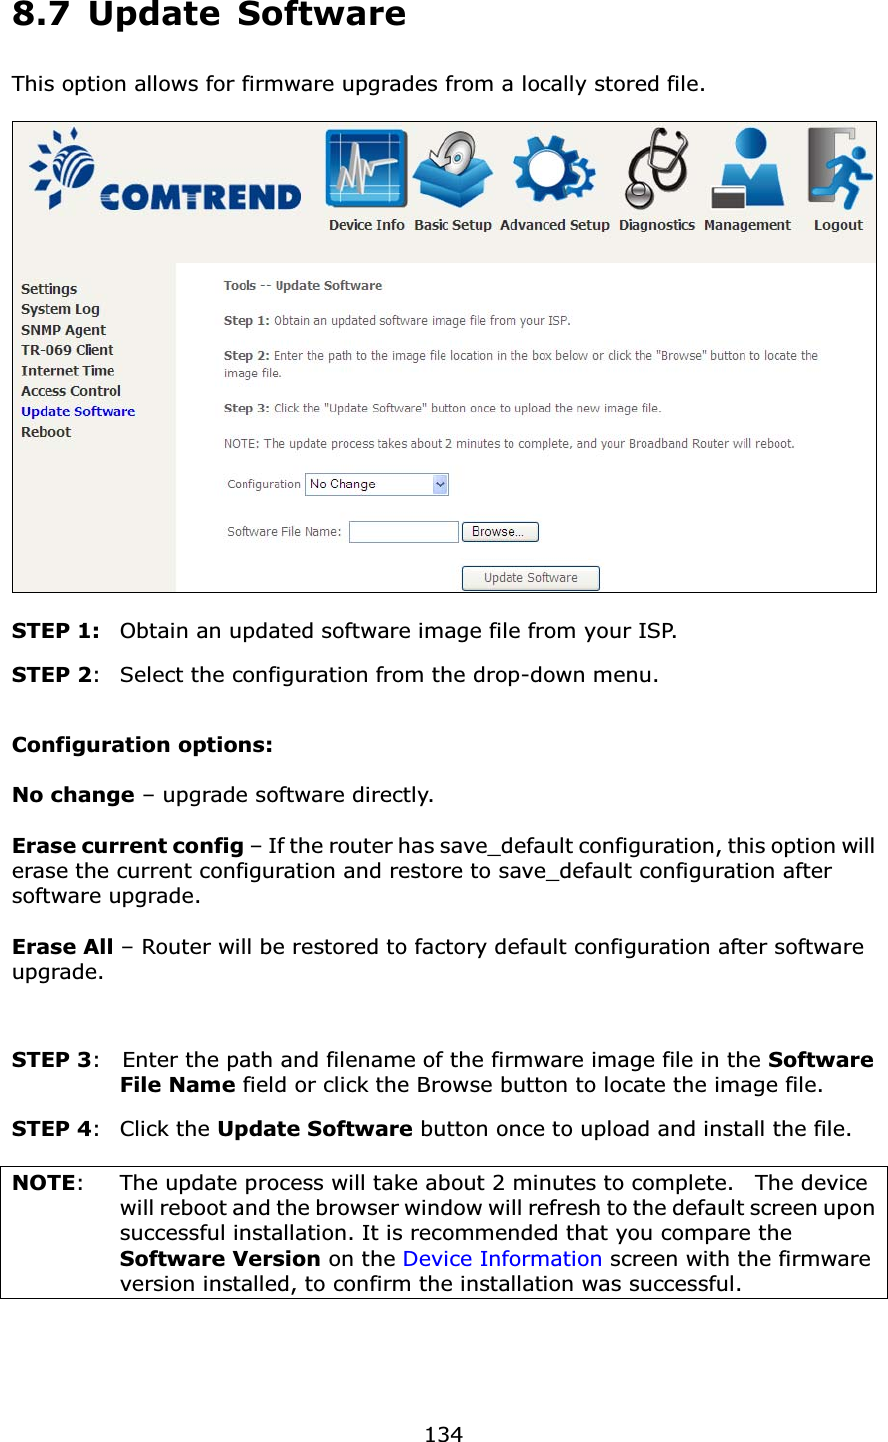 1348.7 Update SoftwareThis option allows for firmware upgrades from a locally stored file.STEP 1: Obtain an updated software image file from your ISP.STEP 2: Select the configuration from the drop-down menu.Configuration options: No change – upgrade software directly.Erase current config – If the router has save_default configuration, this option will erase the current configuration and restore to save_default configuration after software upgrade.Erase All – Router will be restored to factory default configuration after software upgrade.STEP 3: Enter the path and filename of the firmware image file in the SoftwareFile Name field or click the Browse button to locate the image file.STEP 4: Click the Update Software button once to upload and install the file.NOTE: The update process will take about 2 minutes to complete.    The device will reboot and the browser window will refresh to the default screen upon successful installation. It is recommended that you compare the Software Version on the Device Information screen with the firmware version installed, to confirm the installation was successful.   